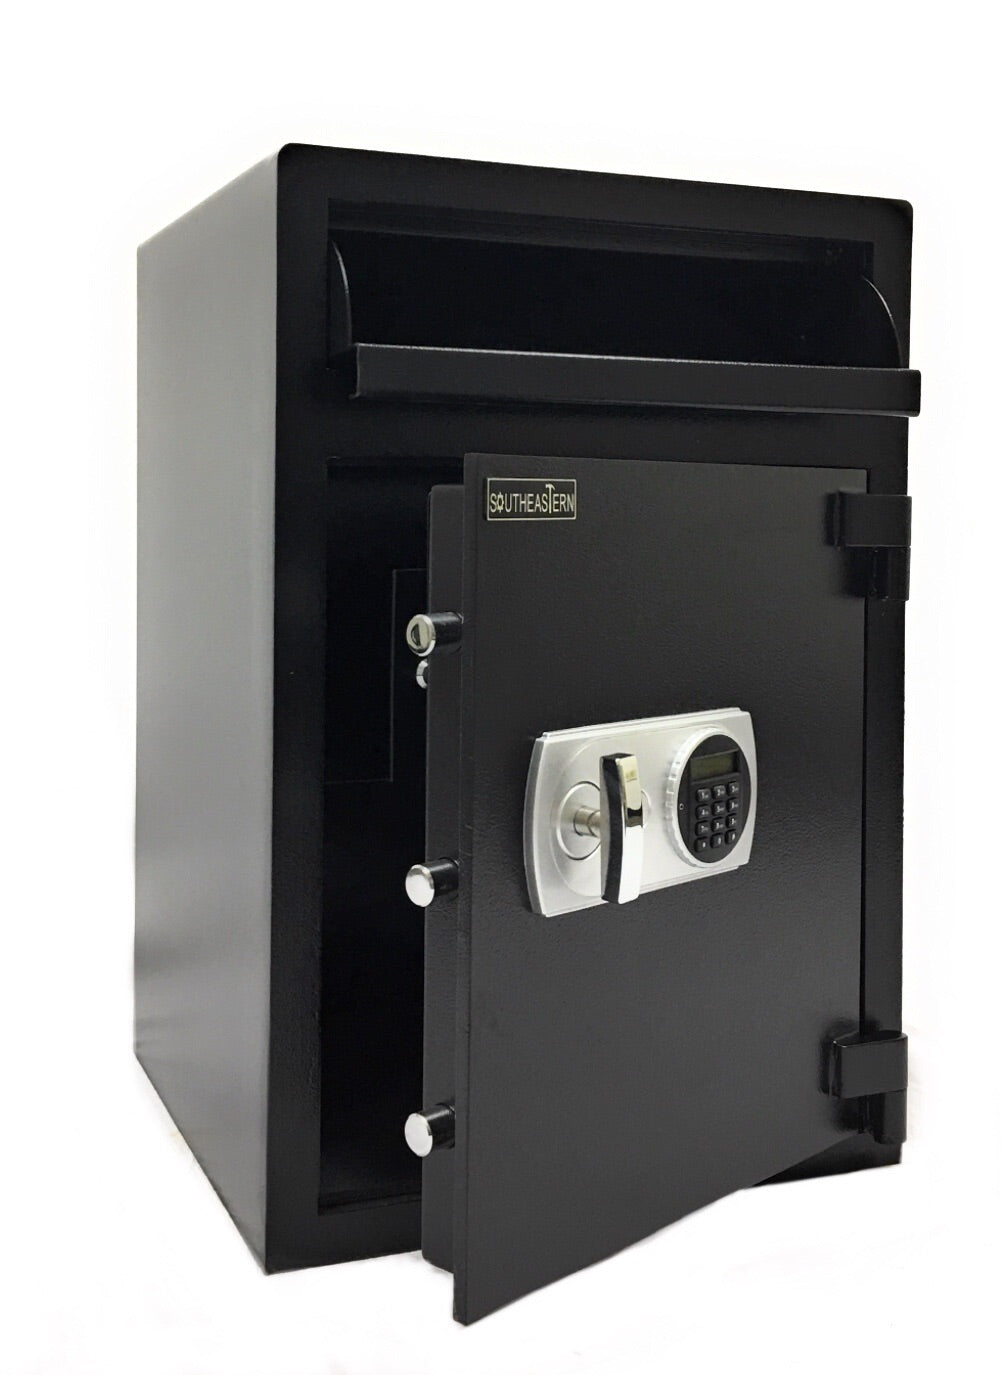 SOUTHEASTERN Drop safe with Quick digital lock including override keys and keyed inside compartment